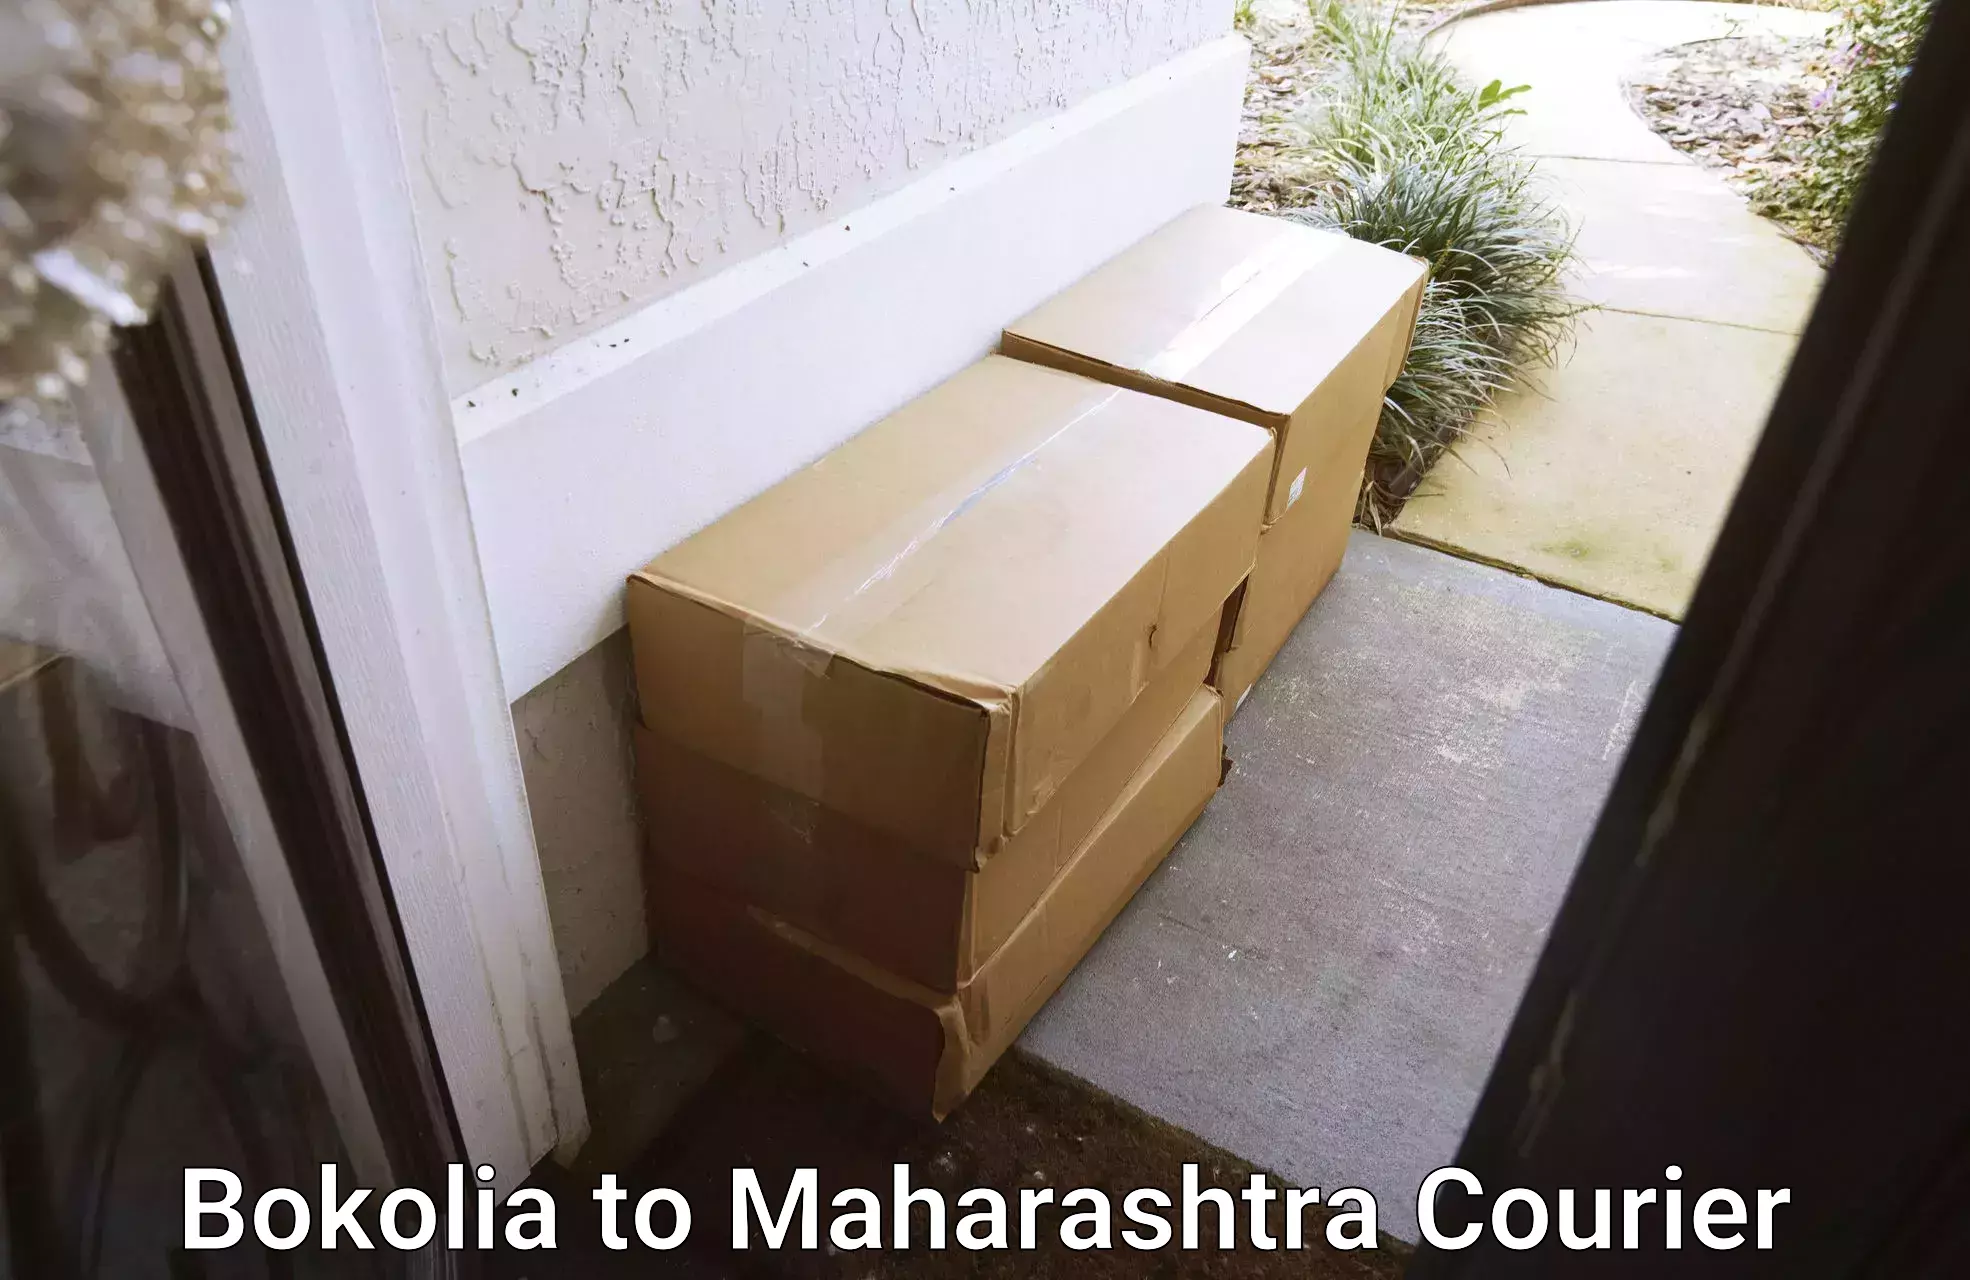 Courier service booking in Bokolia to Vaduj